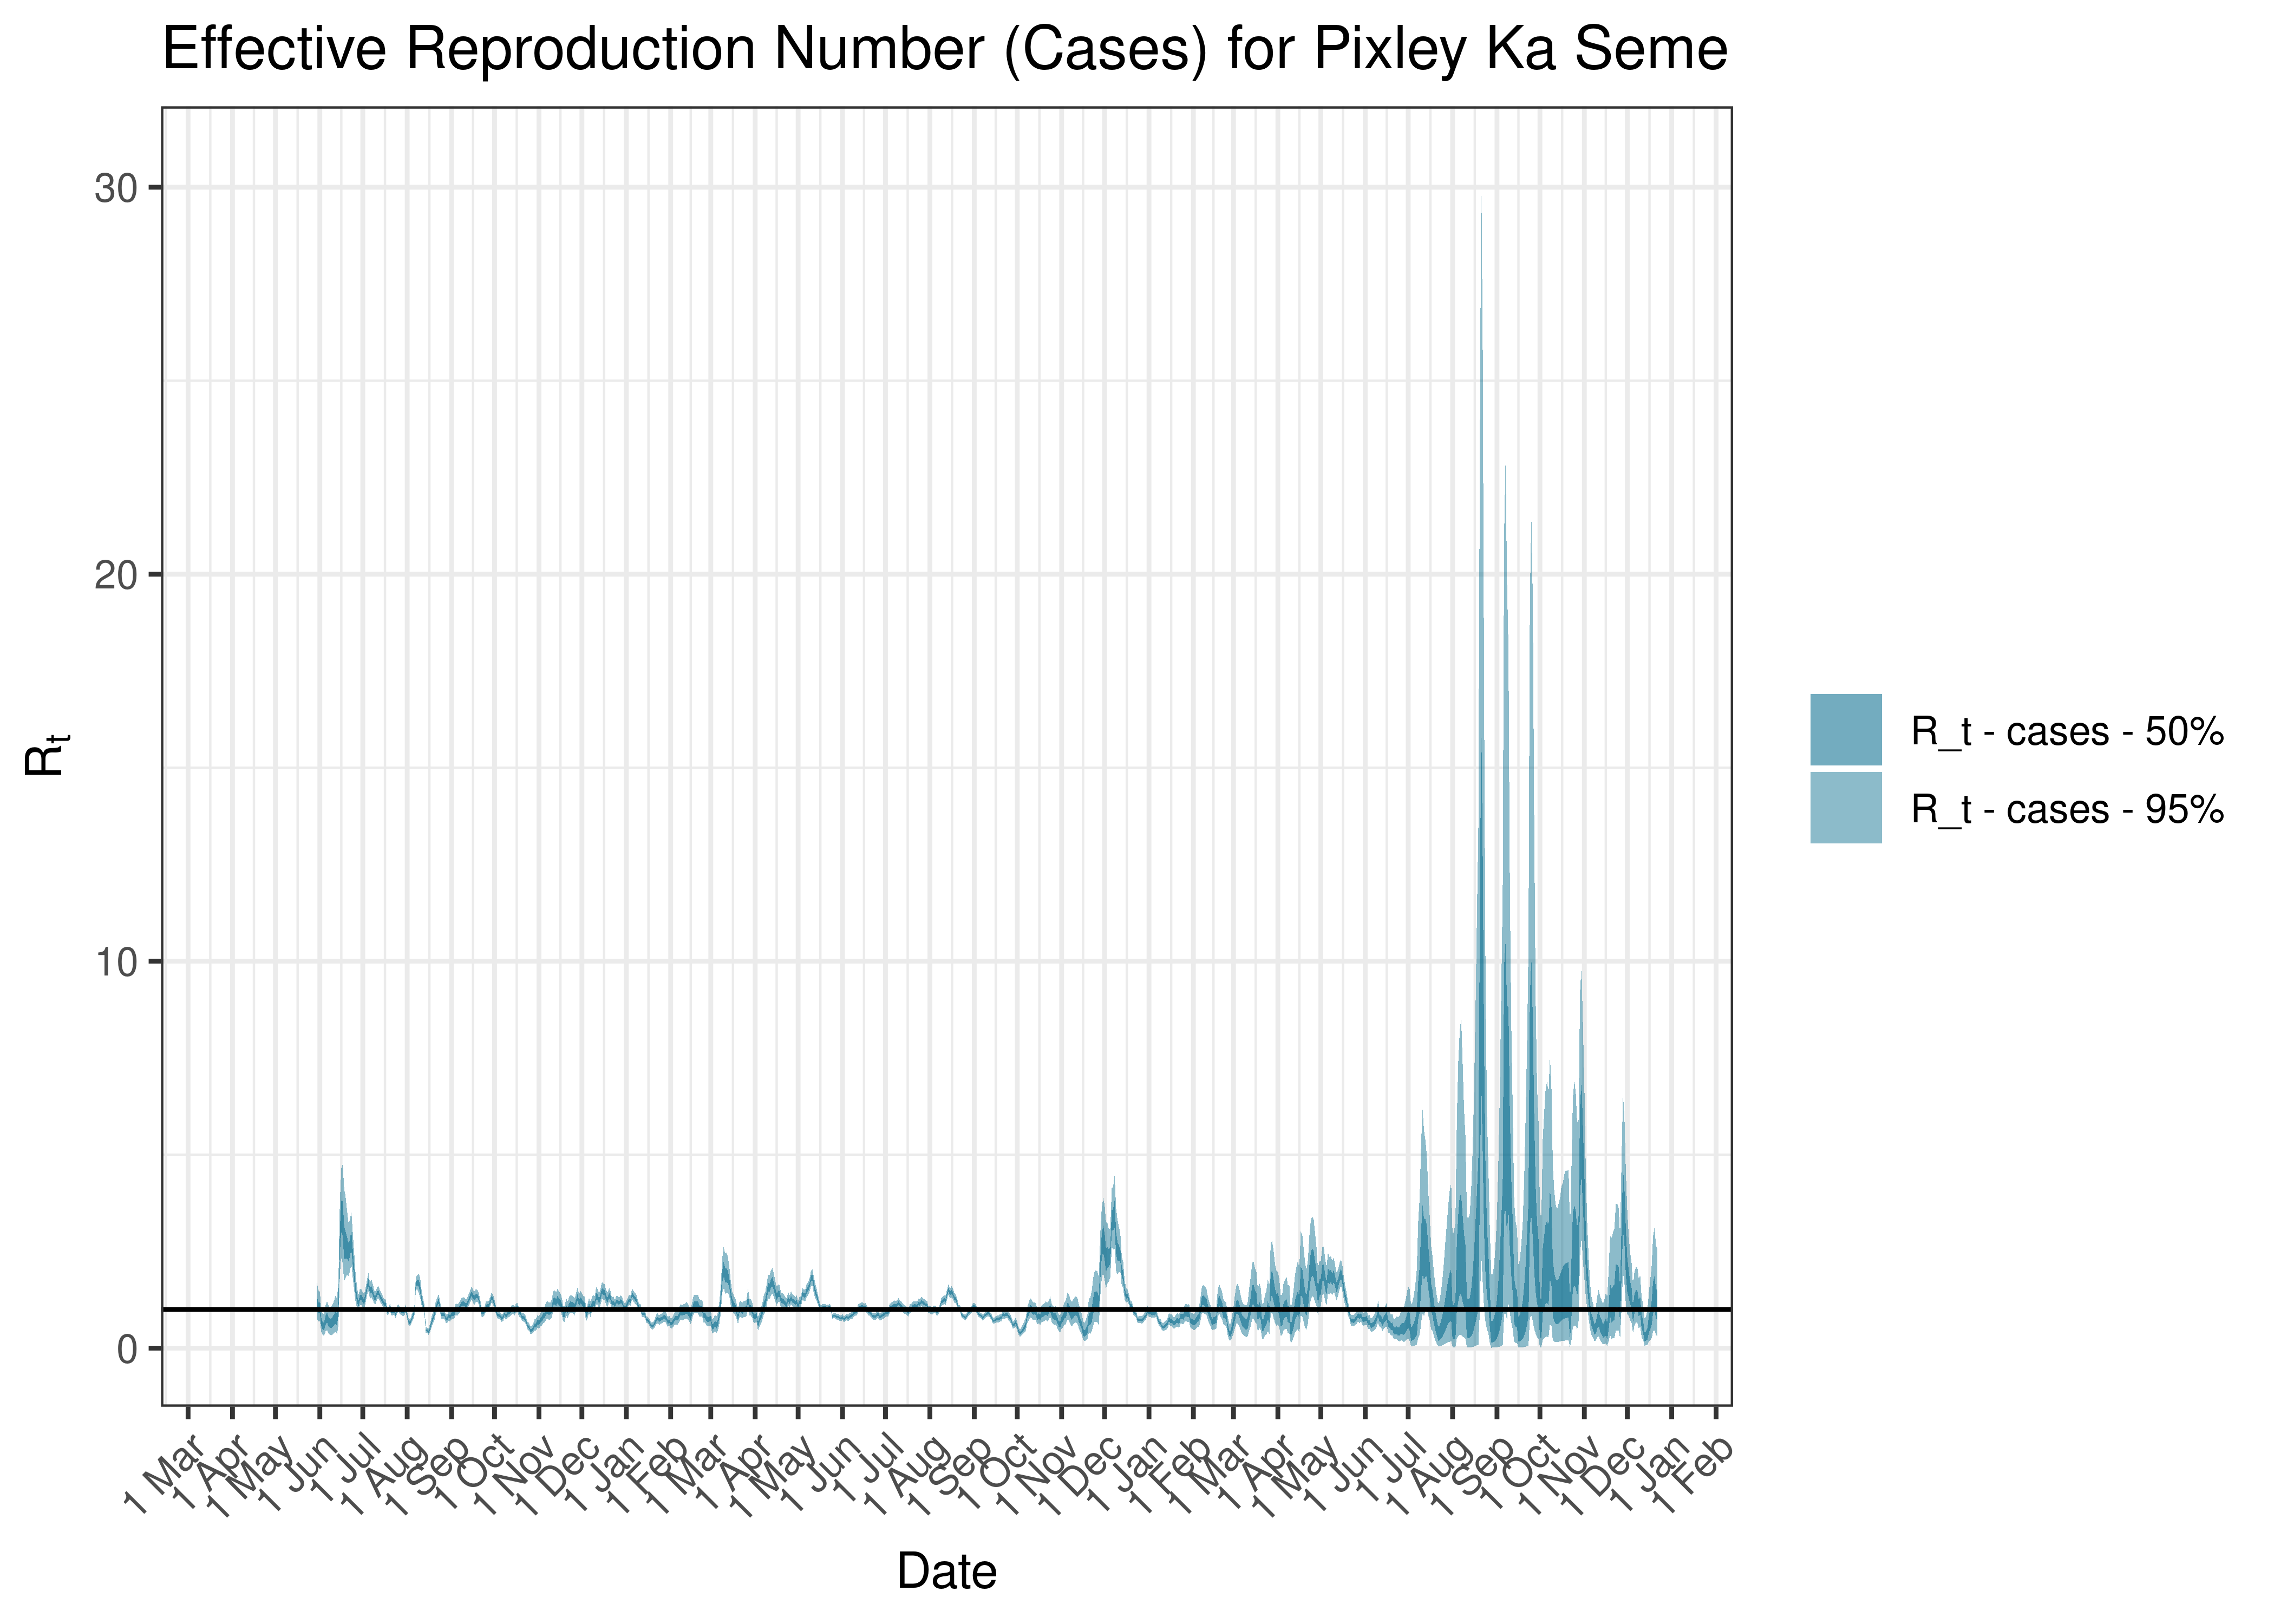 Estimated Effective Reproduction Number Based on Cases for Pixley Ka Seme since 1 April 2020